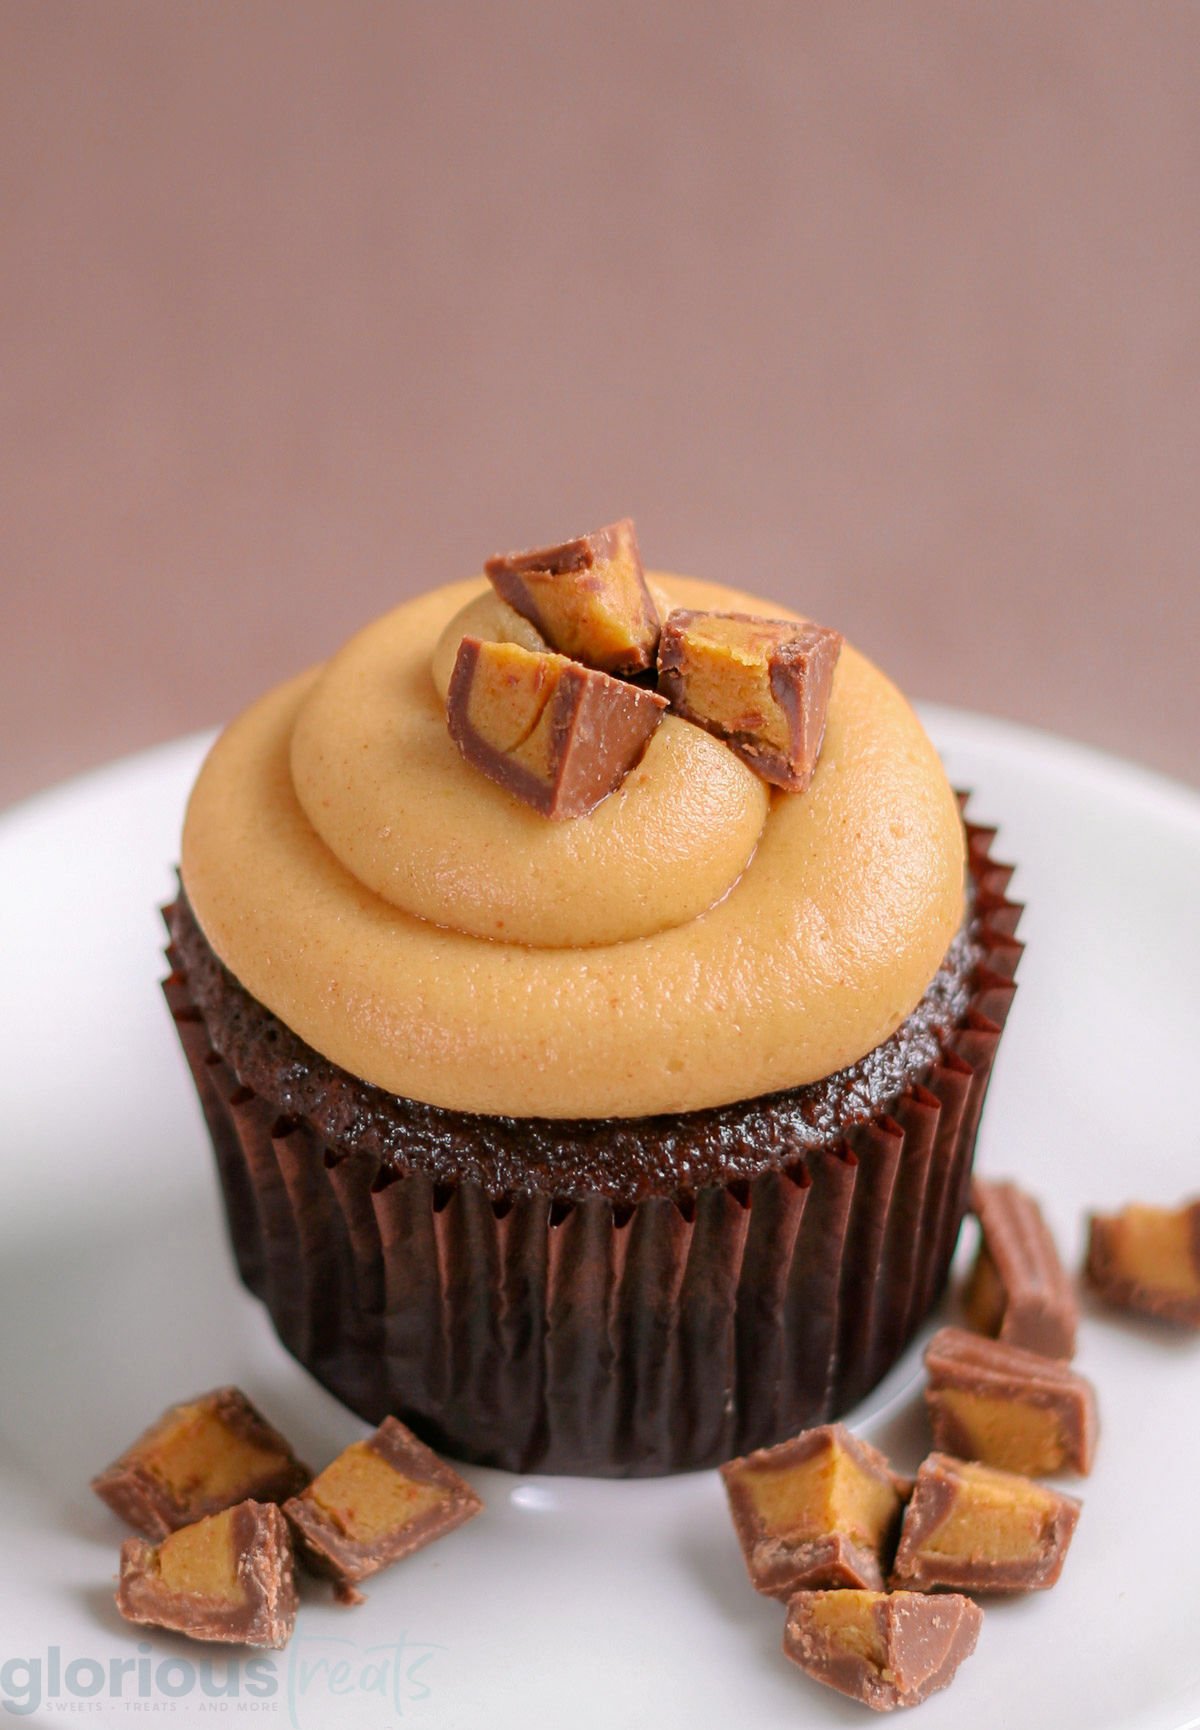 single chocolate peanut butter cupcake sitting on a white cake stand. the cupcake is topped with a creamy peanut butter frosting and chopped mini reeses candy. more pieces of the candy are scattered on the cake stand.